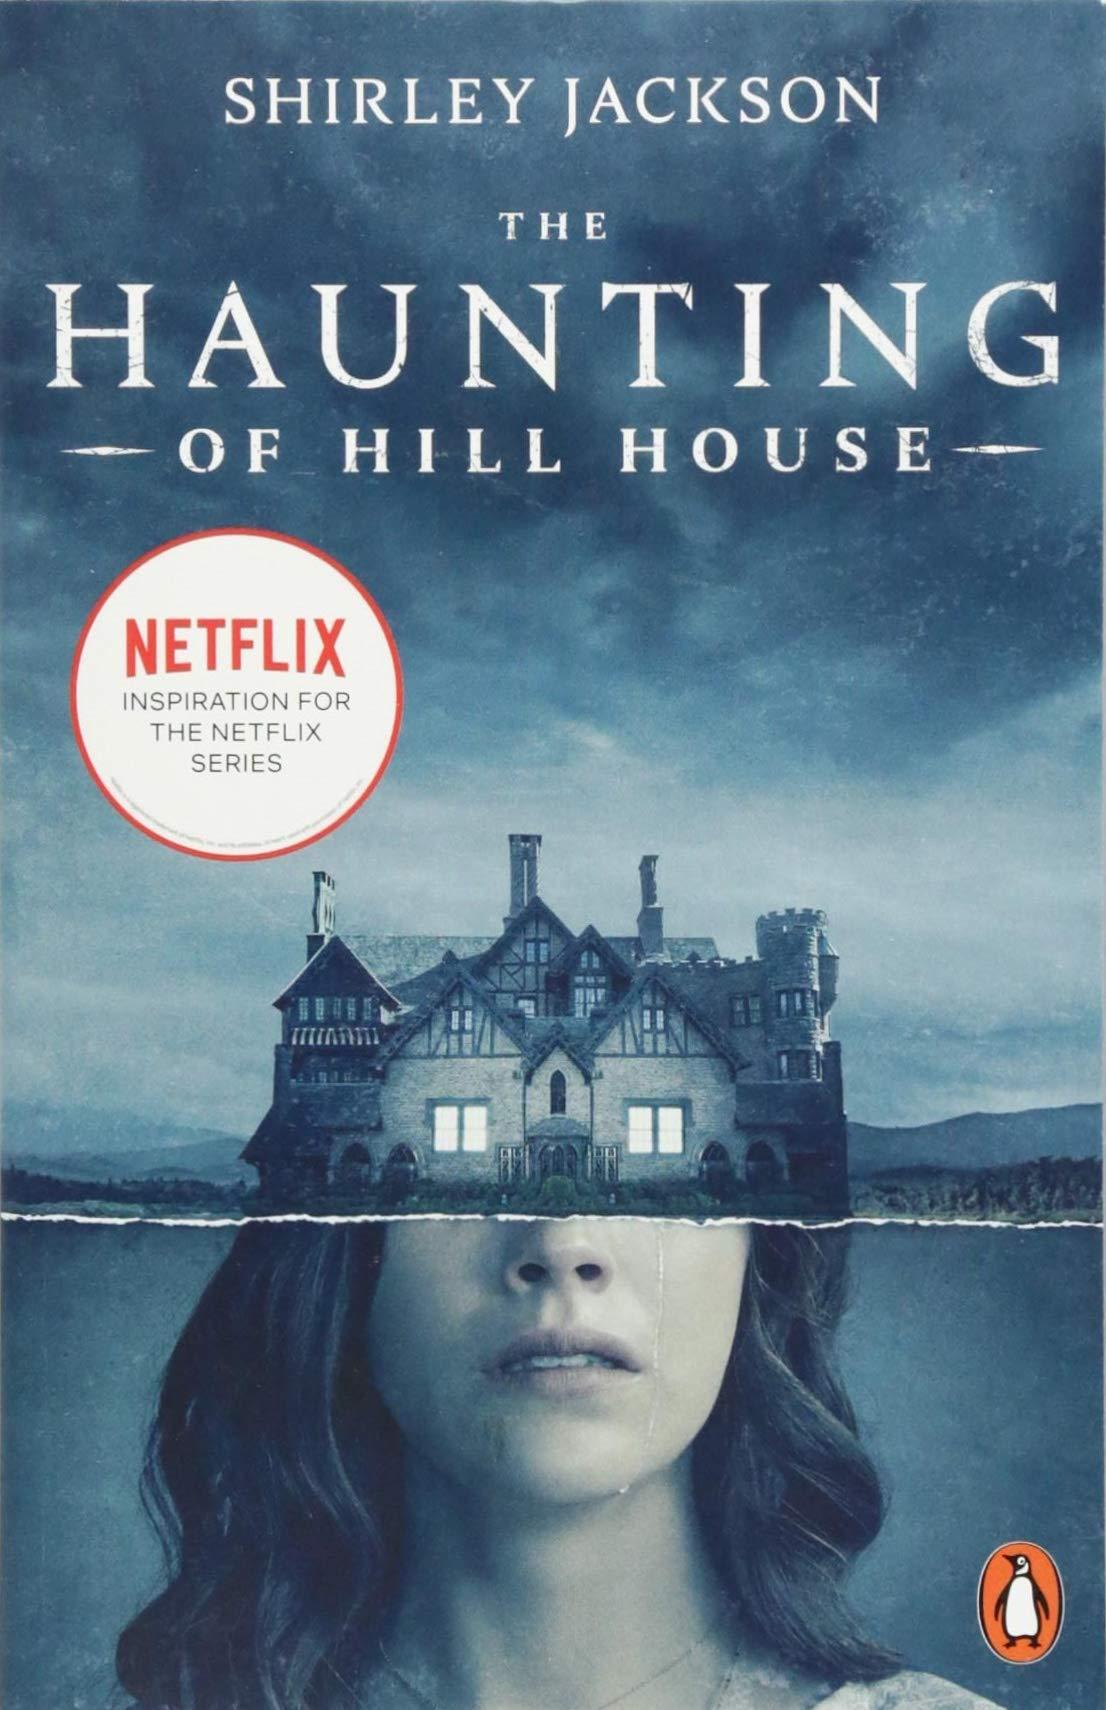 Haunting of Hill House Film Tie in